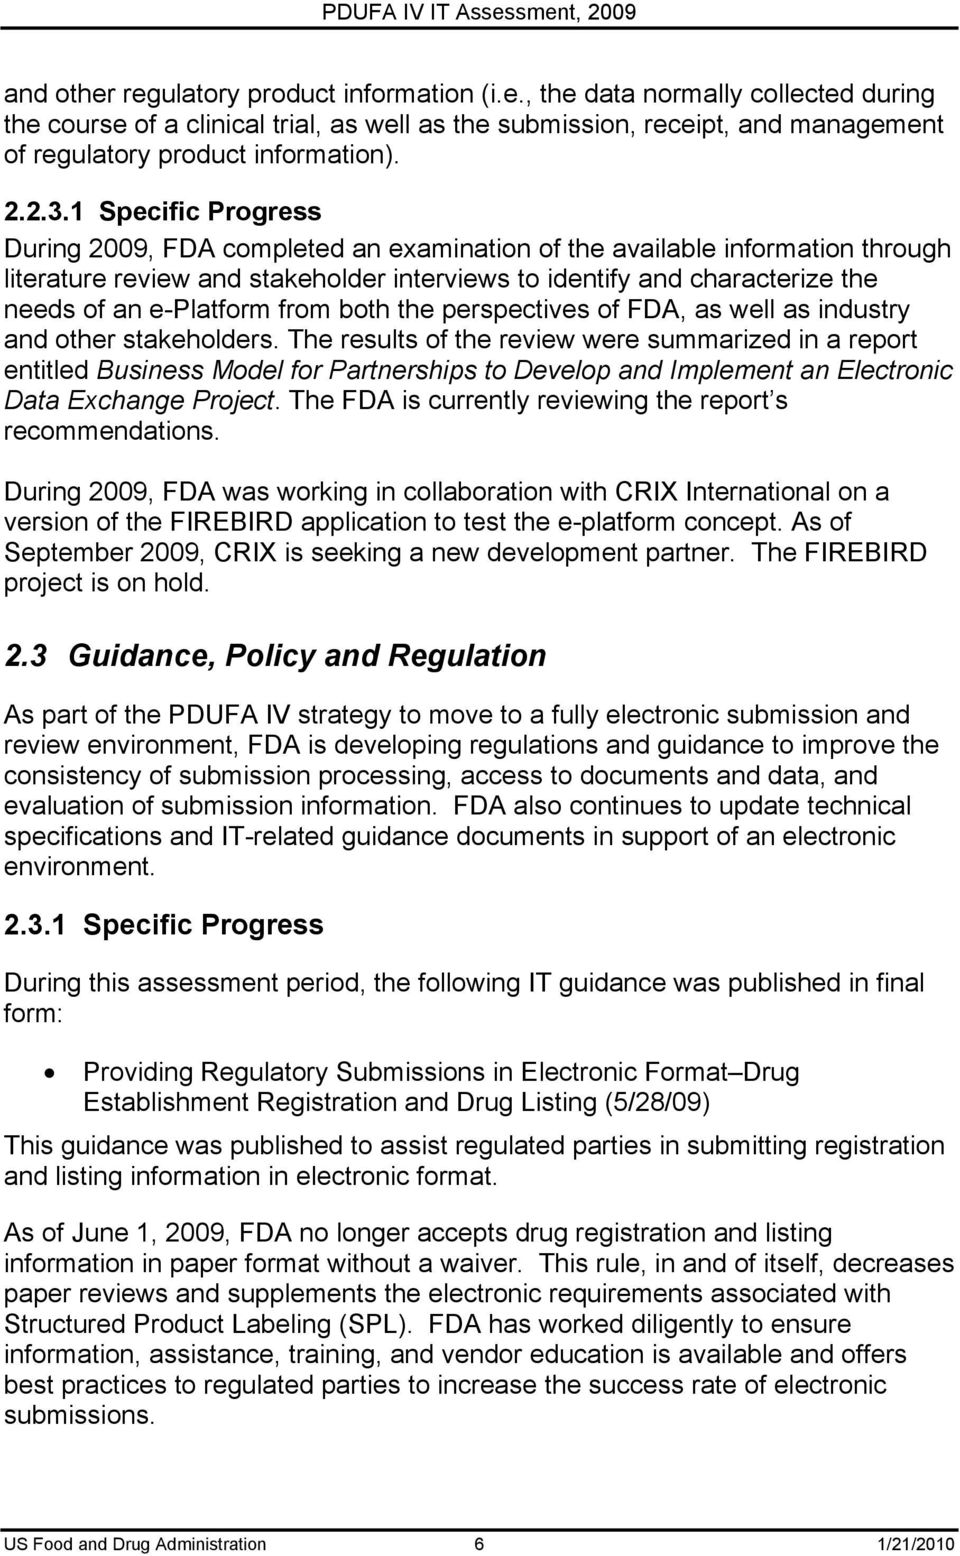 1 Specific Progress During 2009, FDA completed an examination of the available information through literature review and stakeholder interviews to identify and characterize the needs of an e-platform